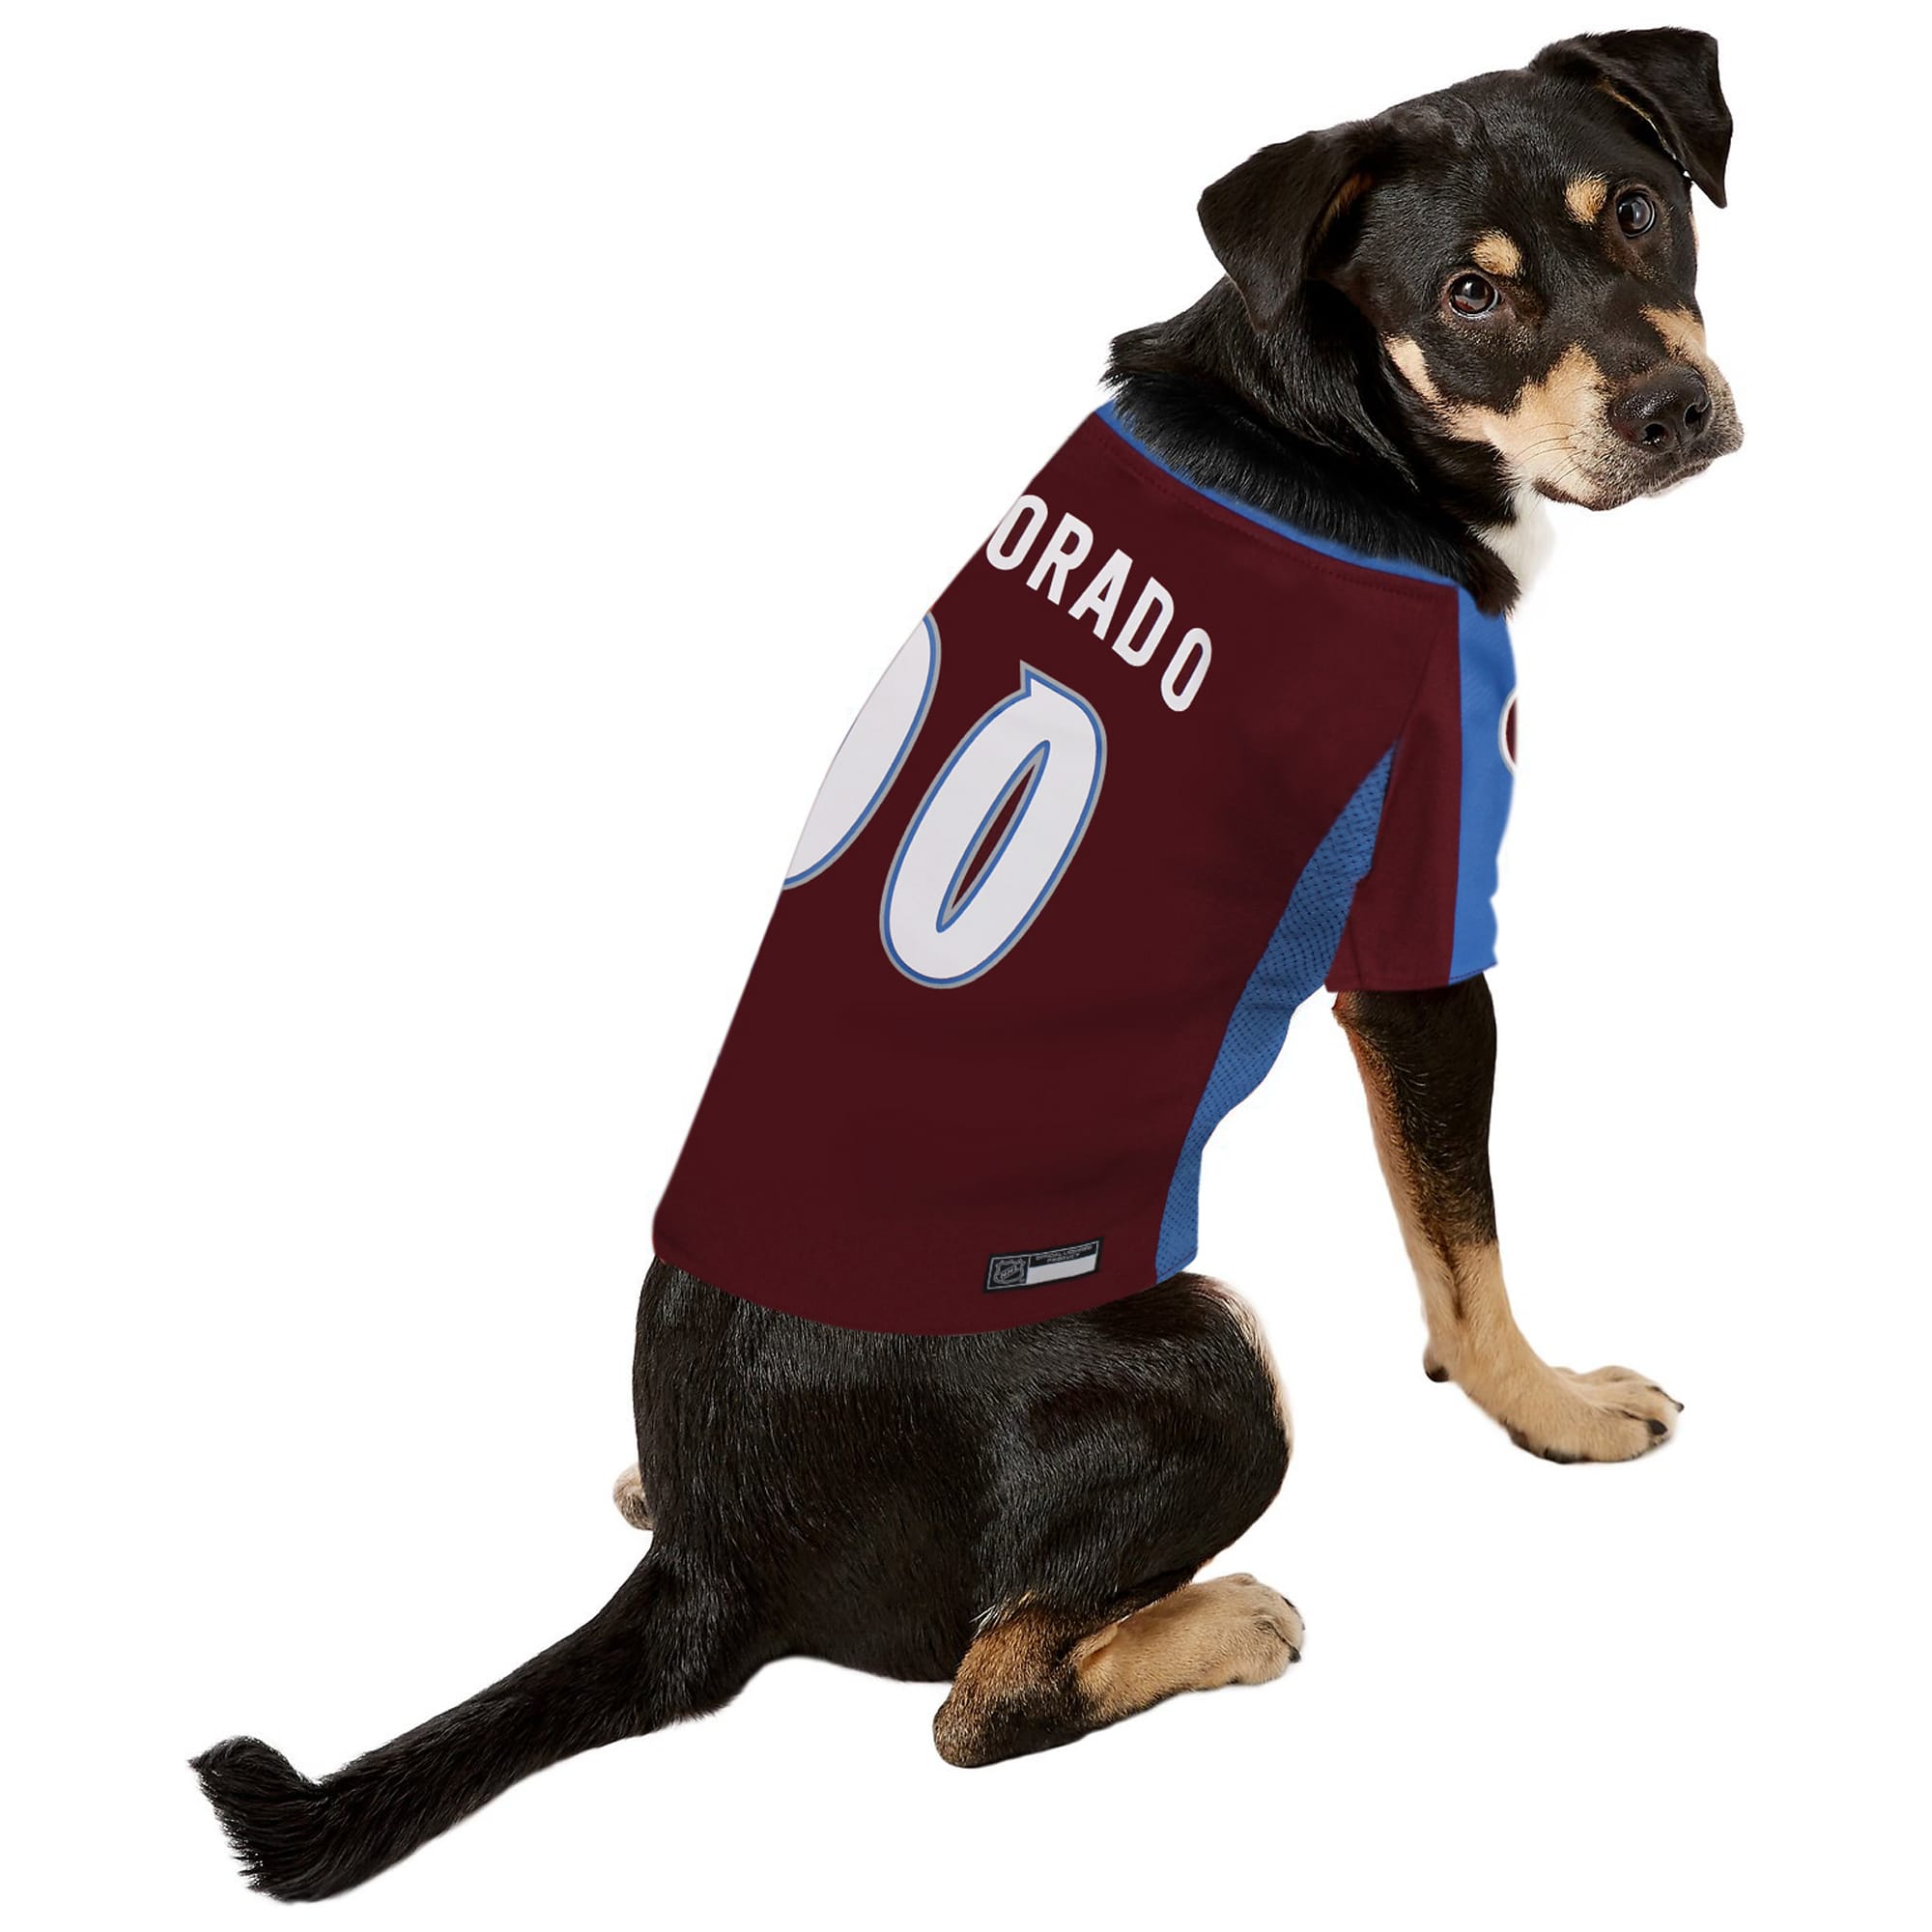 All Star Dogs: Colorado Avalanche Pet Products